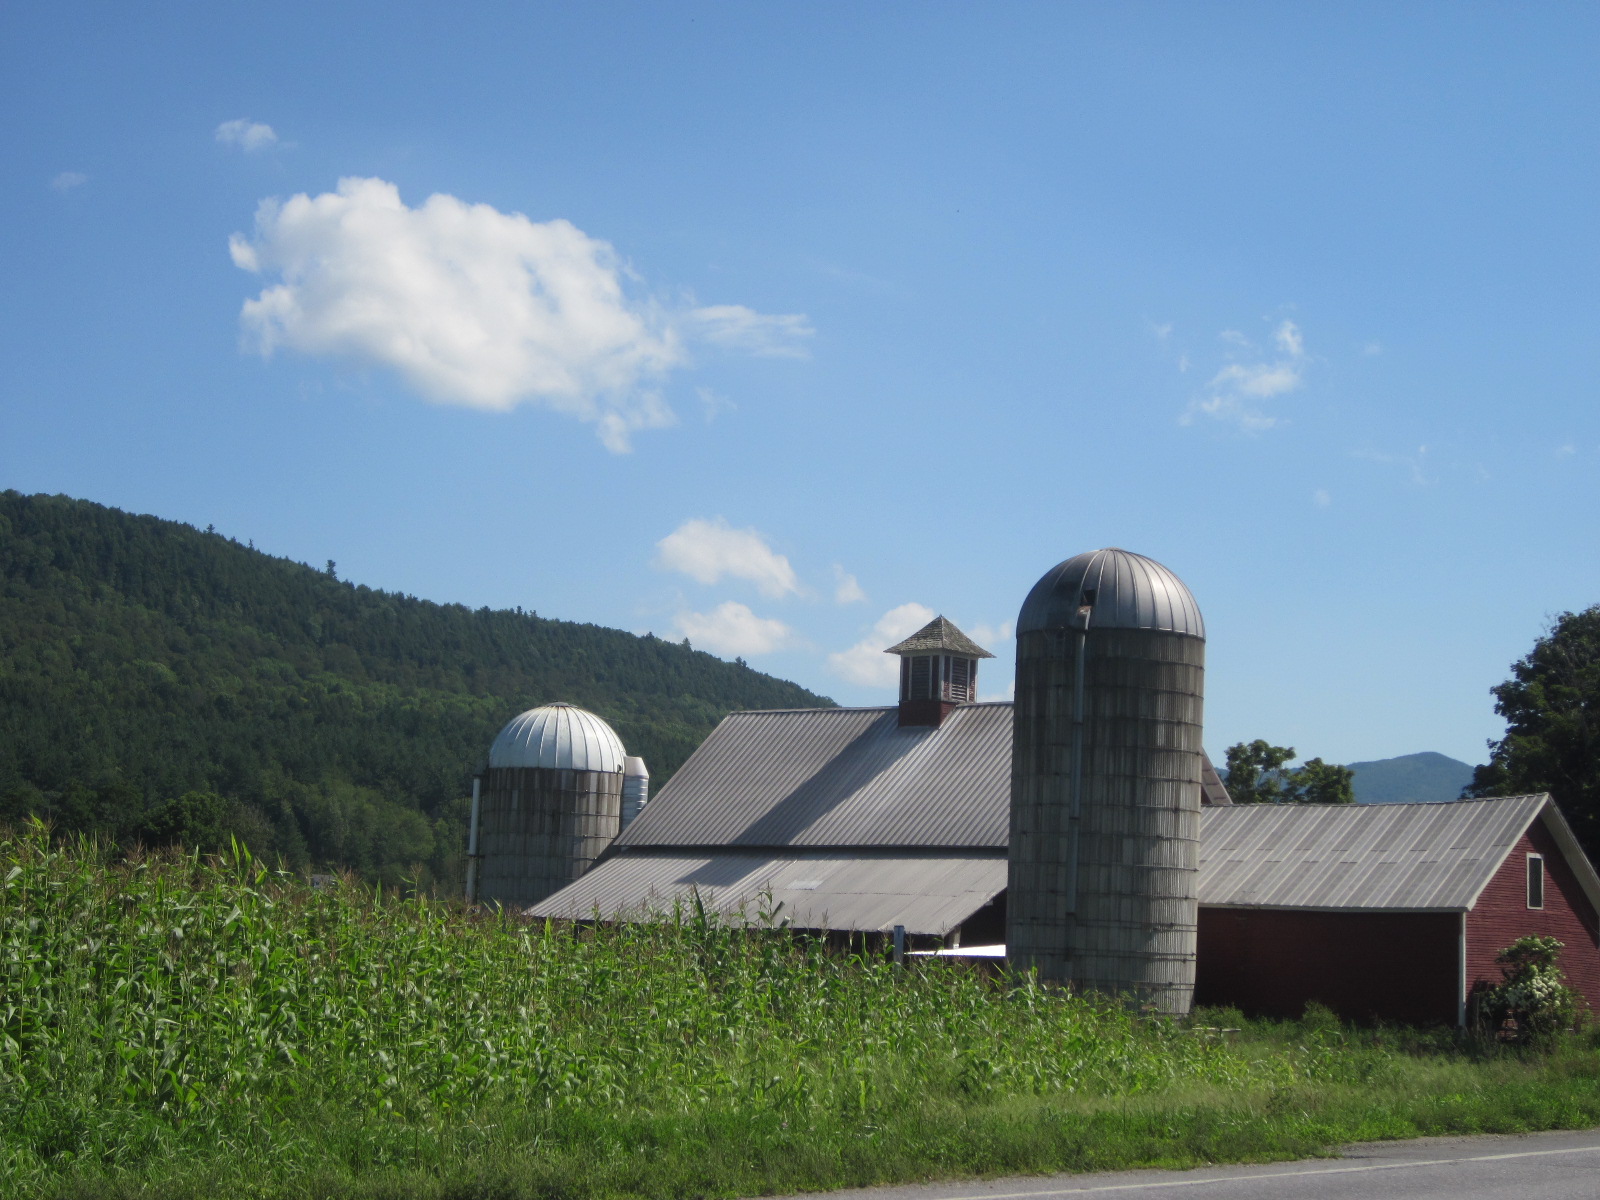 farm country in the Mad River Valley